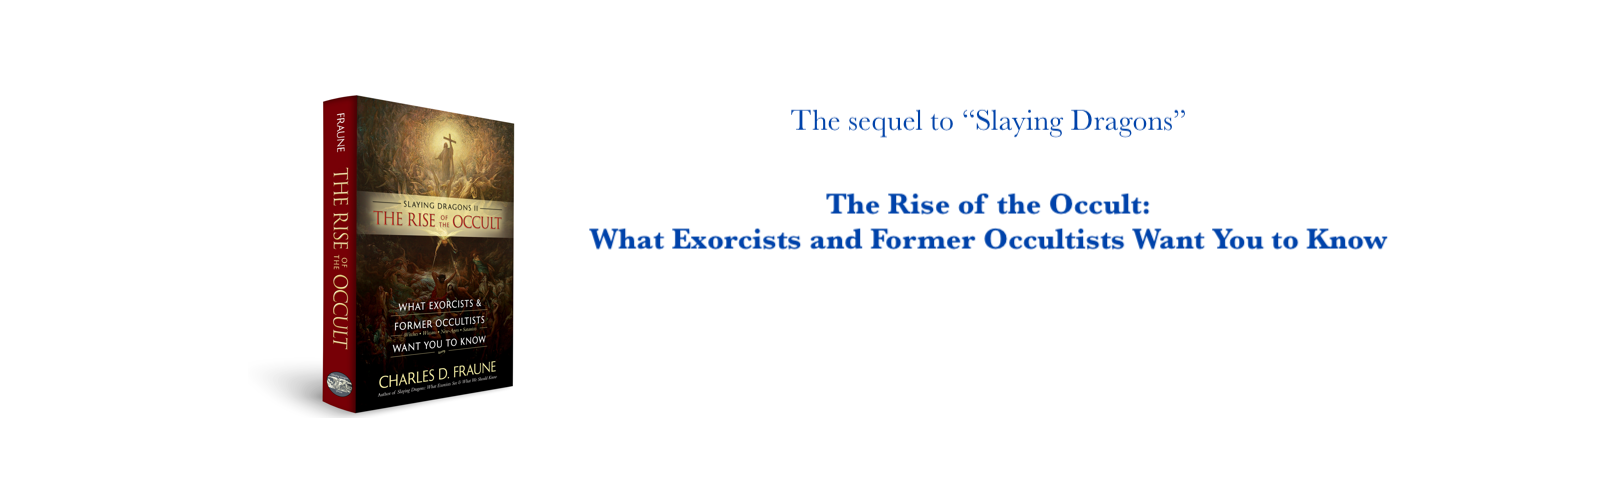 "Do We Need to Learn About the 'Dark and Shadows' of this World?" The purpose of "The Rise of the Occult"